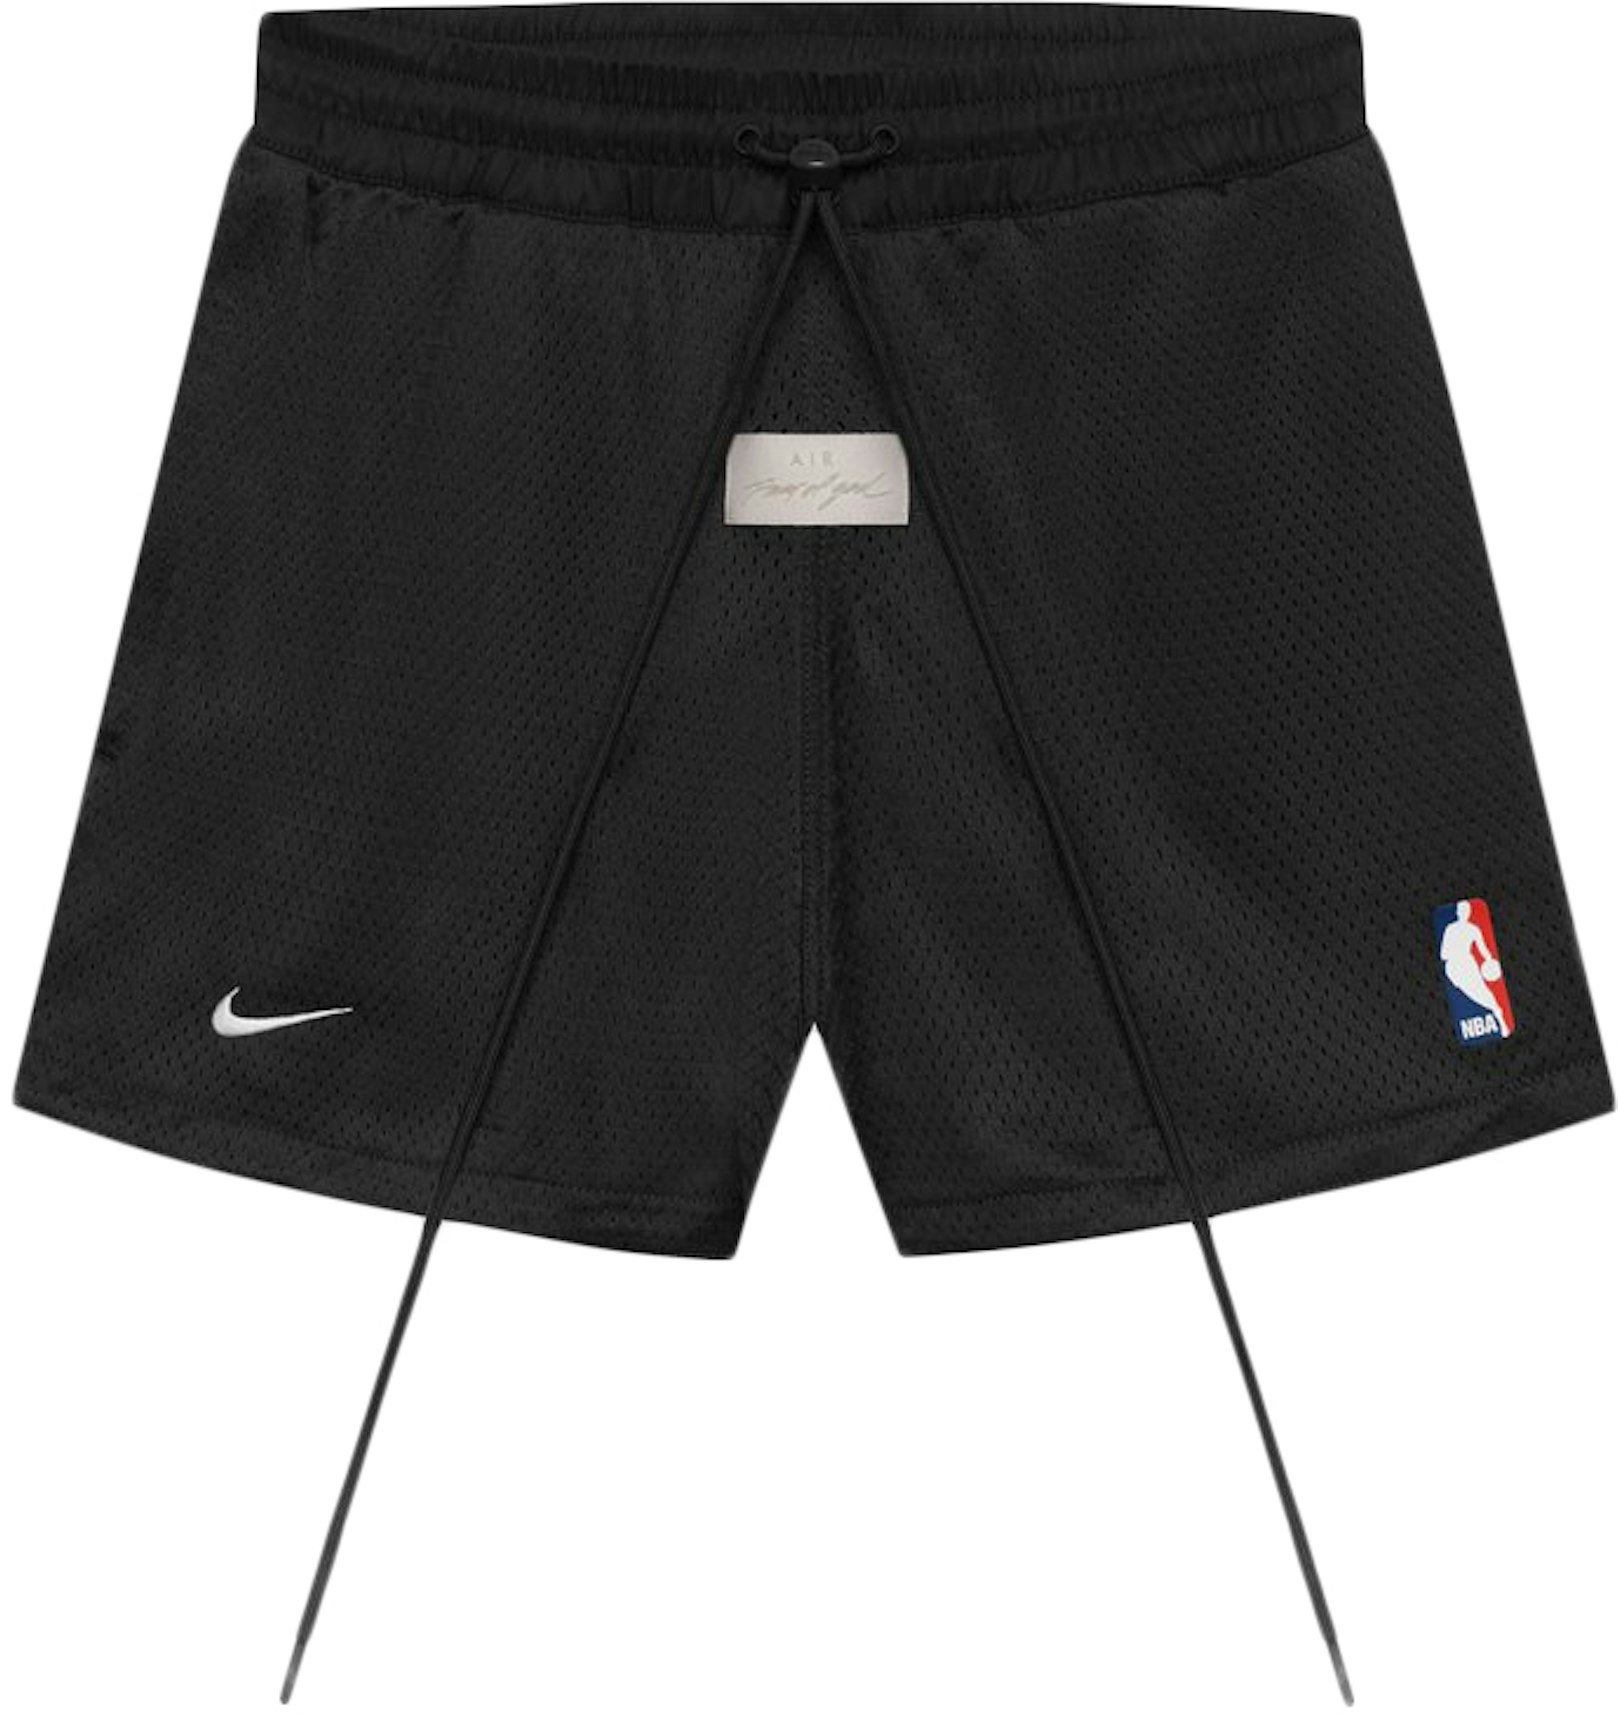 OF x Basketball Shorts Off - FW20 - US